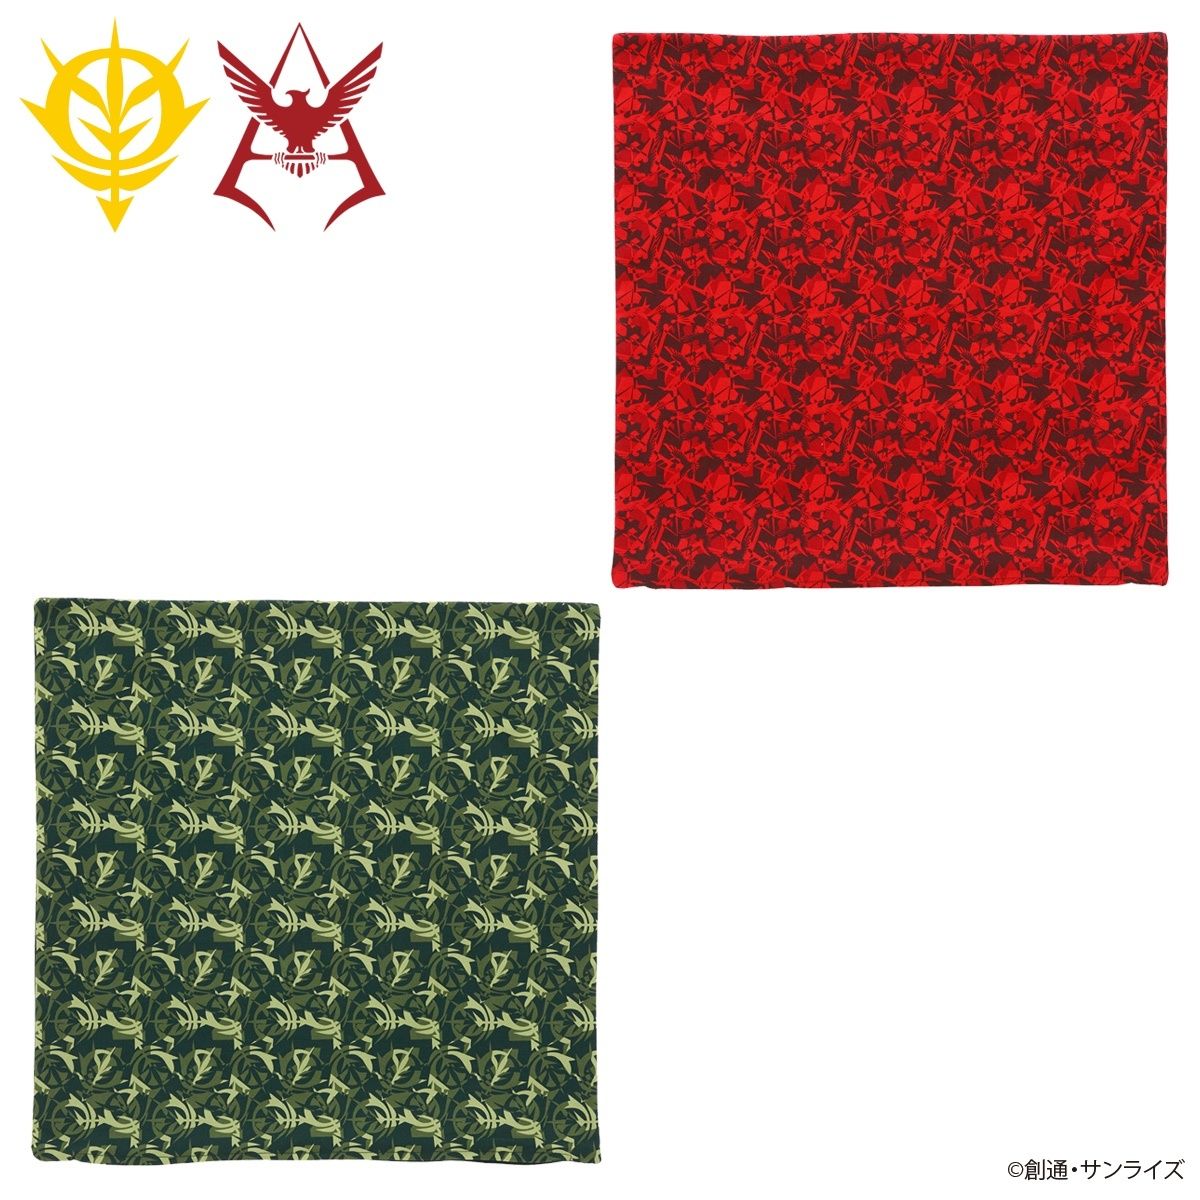 Mobile Suit Gundam Camouflage Pillow Cover